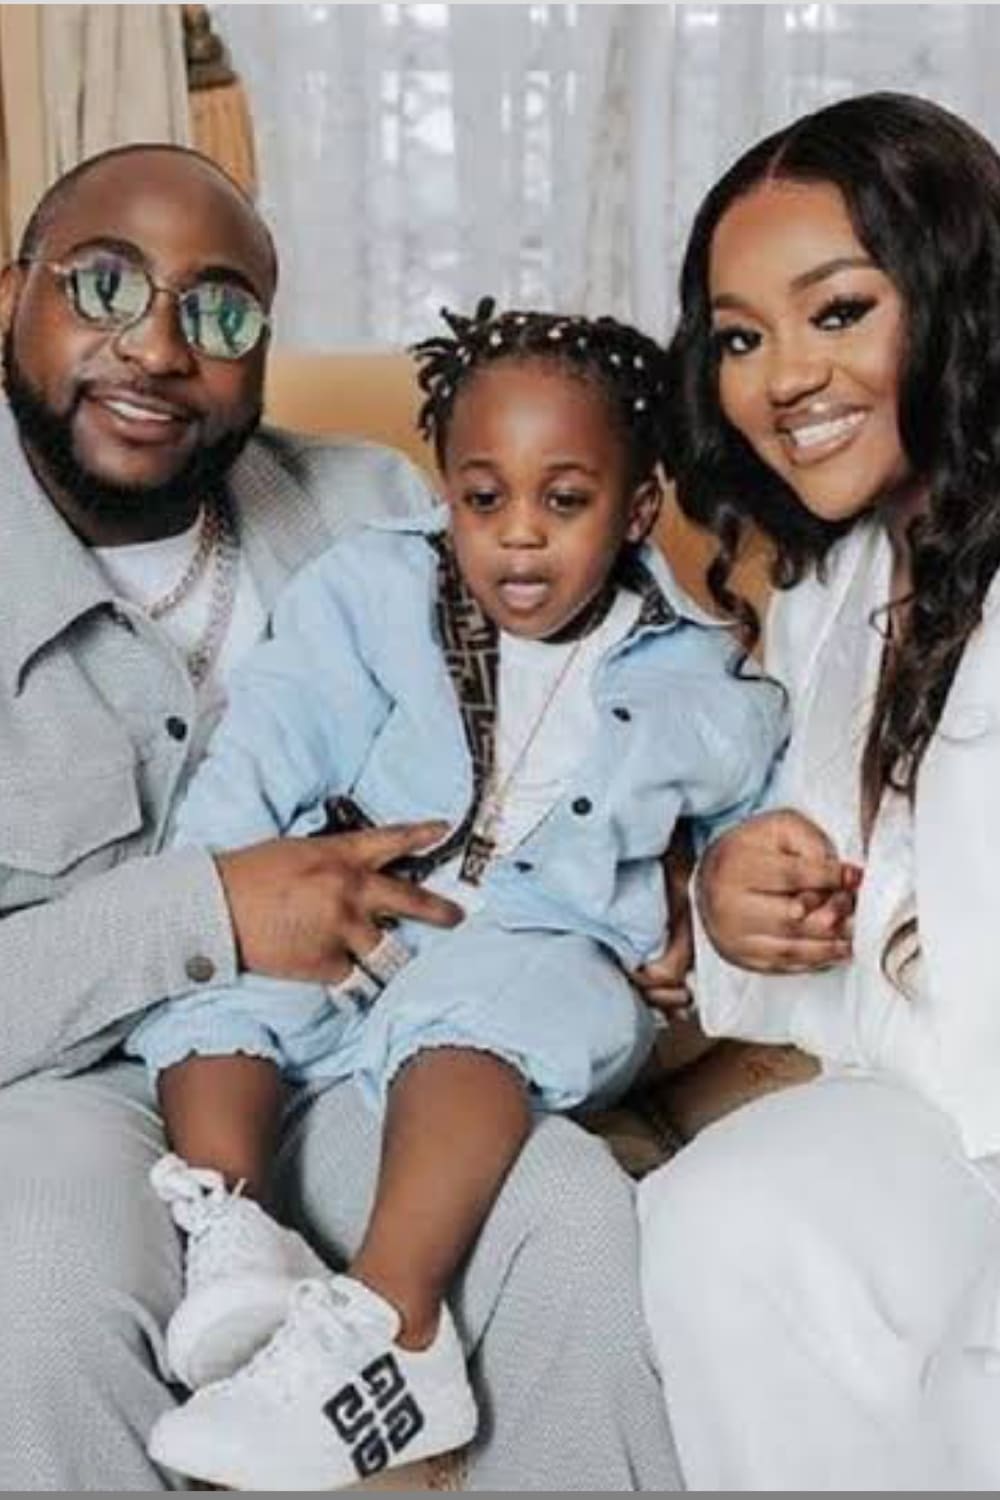 "Davido's son Ifeanyi was actually a girl disguised as a boy for 3 years" - Kemi Olunloyo drops bombshell